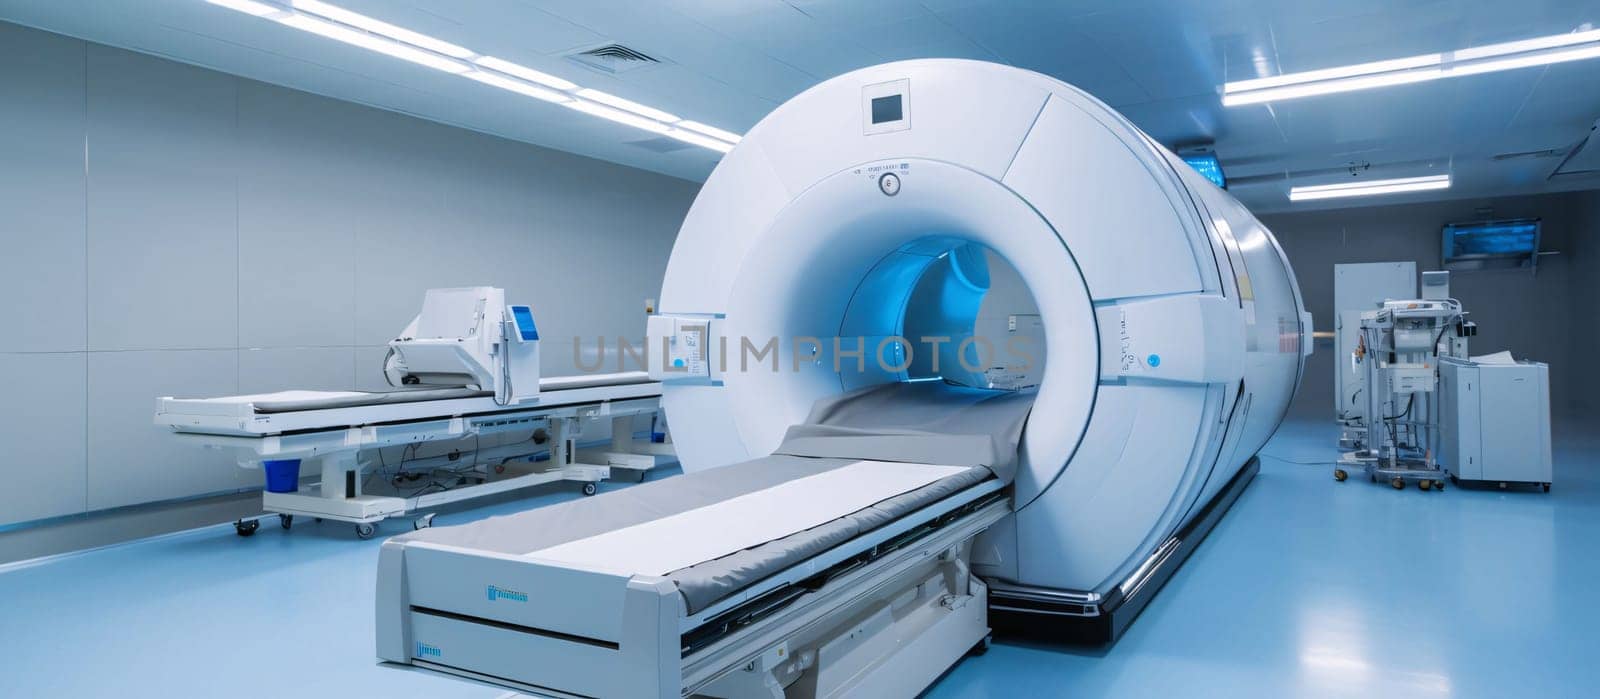 Hospital and doctors help: CT scanner in hospital. Modern medical equipment. Diagnostic and diagnosis